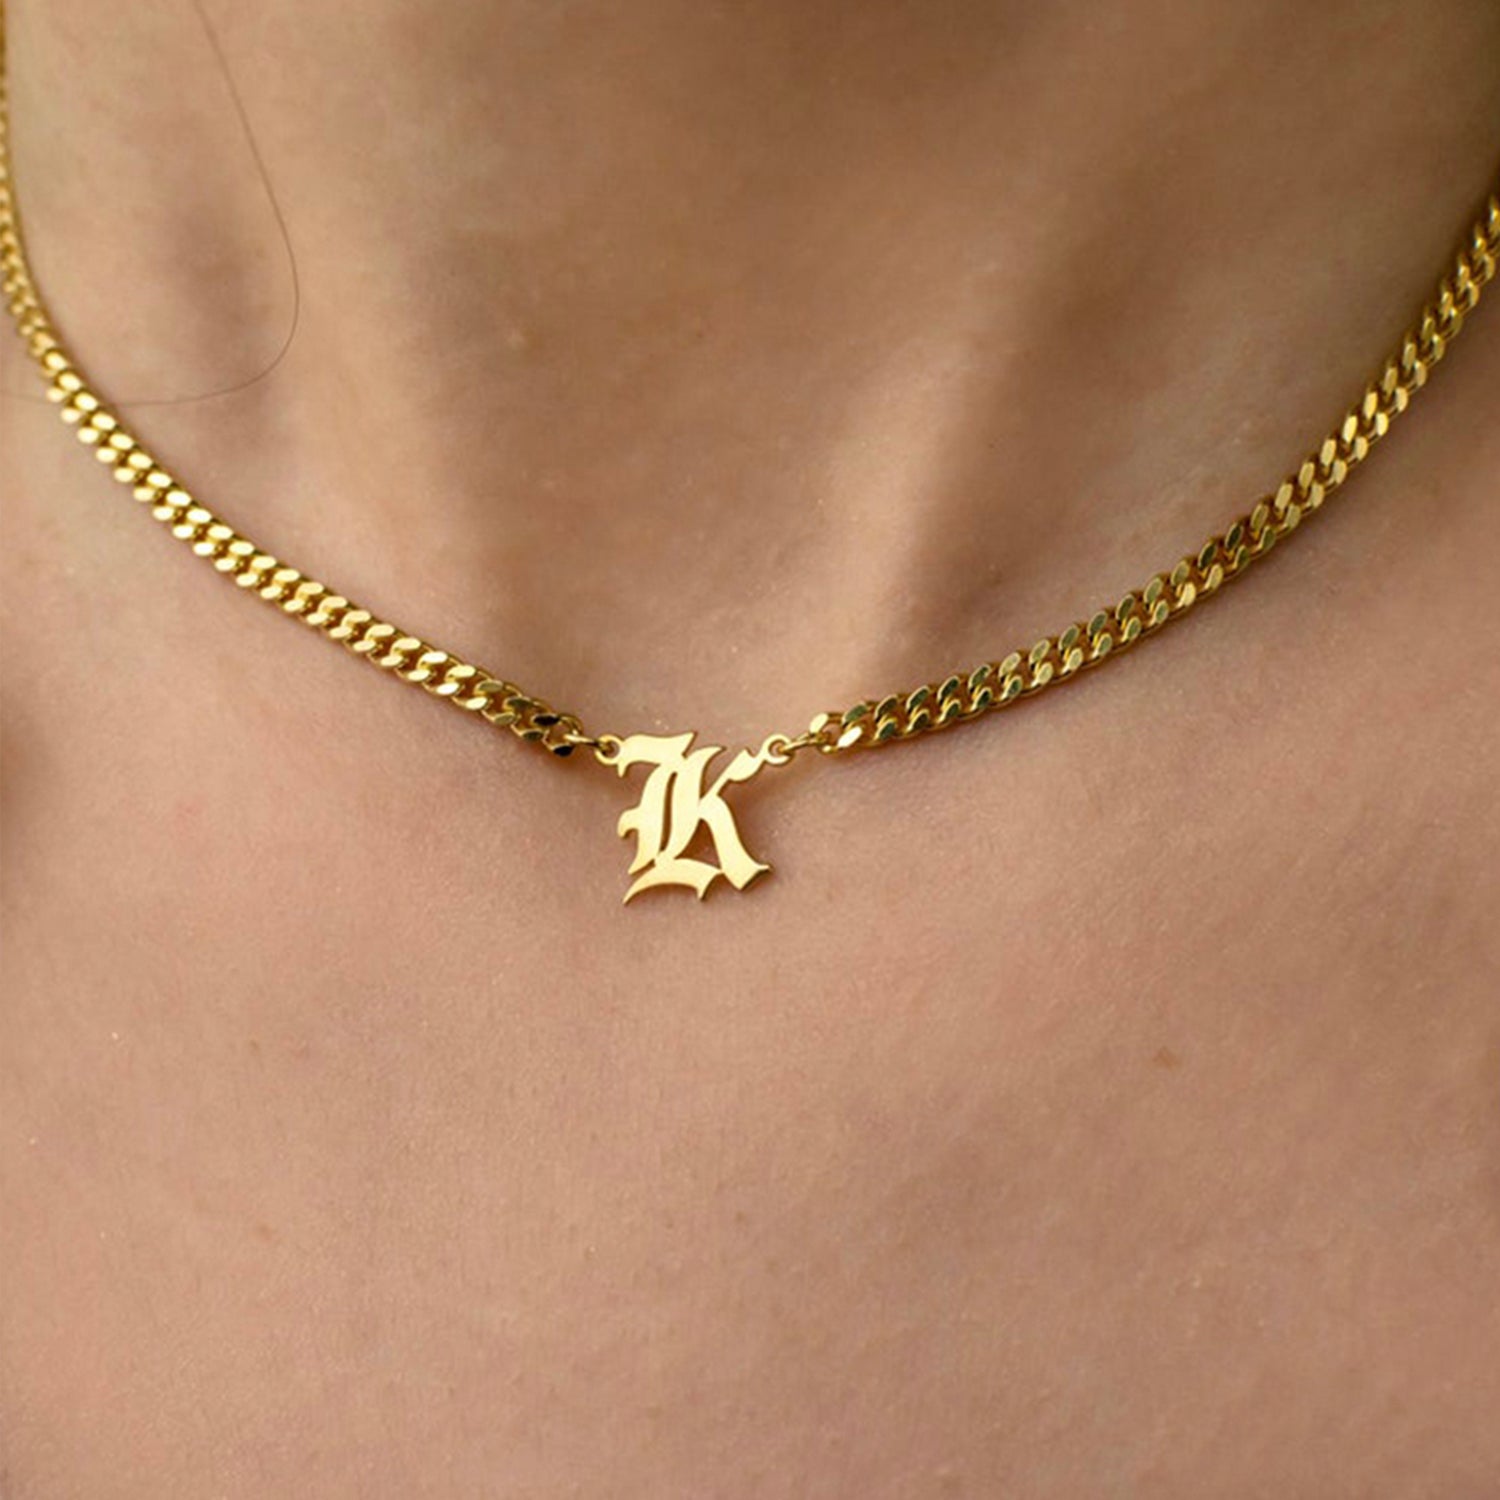 Old English Initial Necklace. This letter initial necklace makes for a meaningful personalized gift for you or someone special. Perfect for any occasion and meant for everyday wear